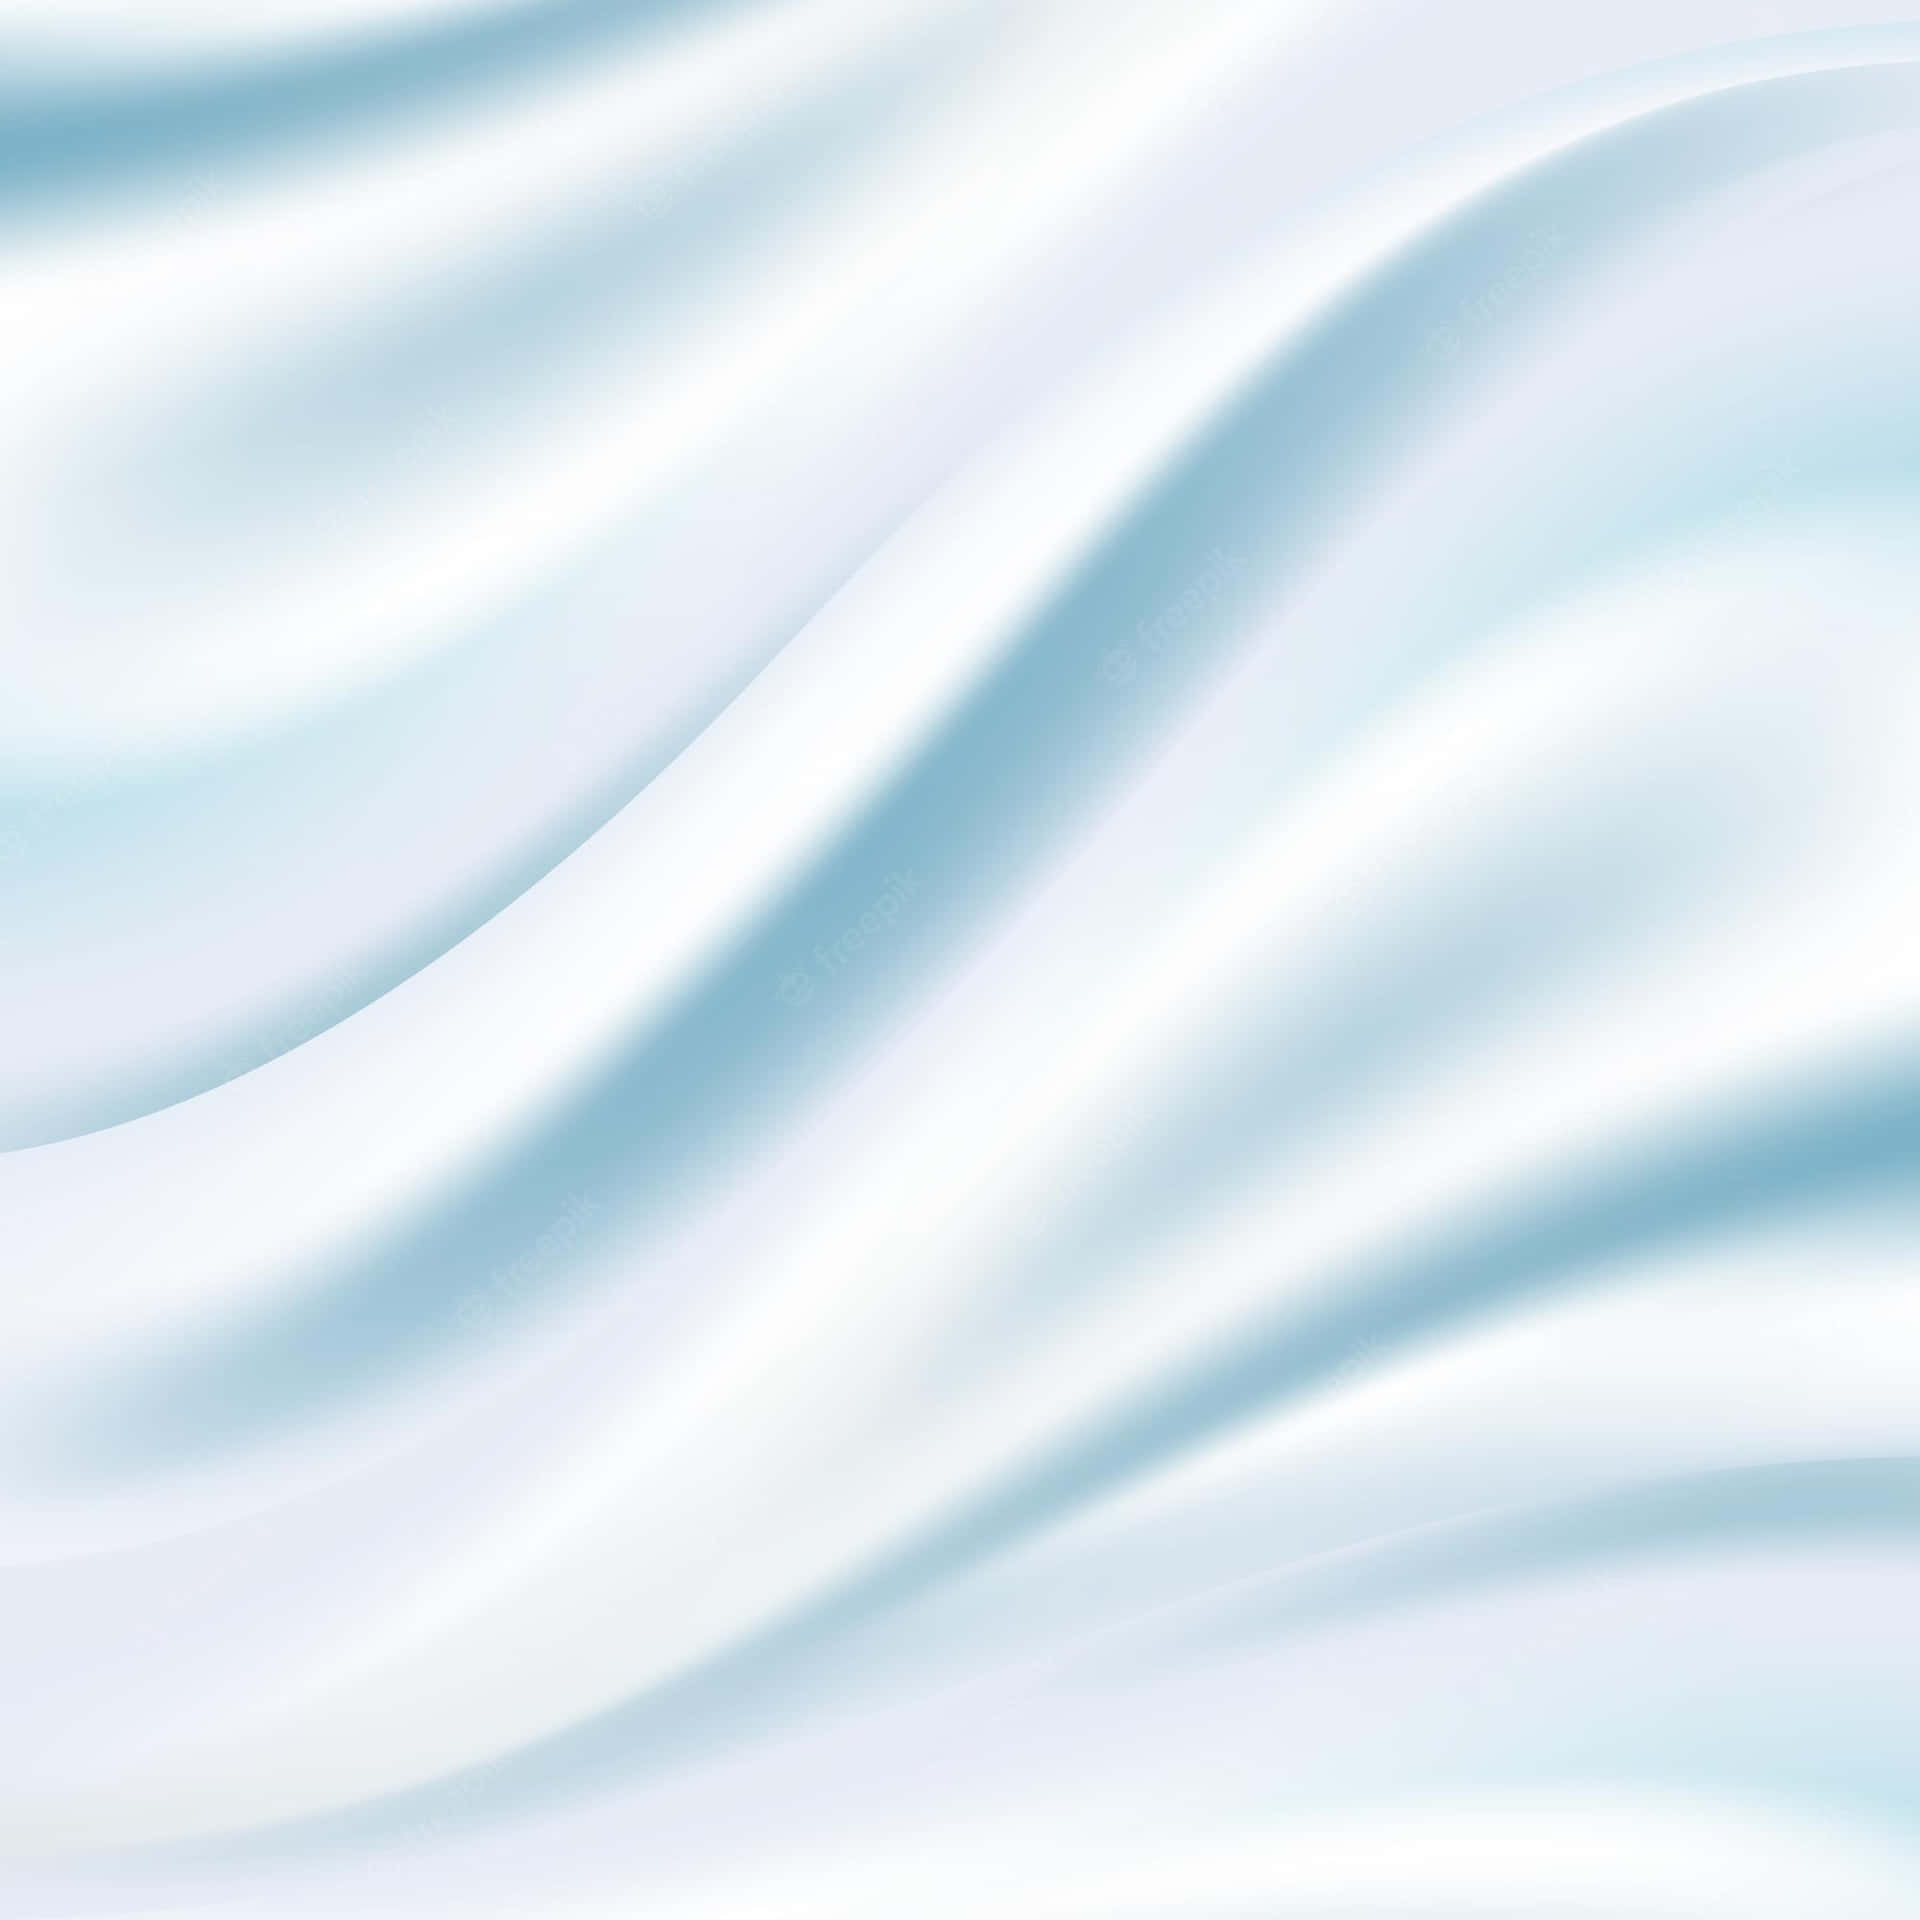 Soft and Calming Blue Background